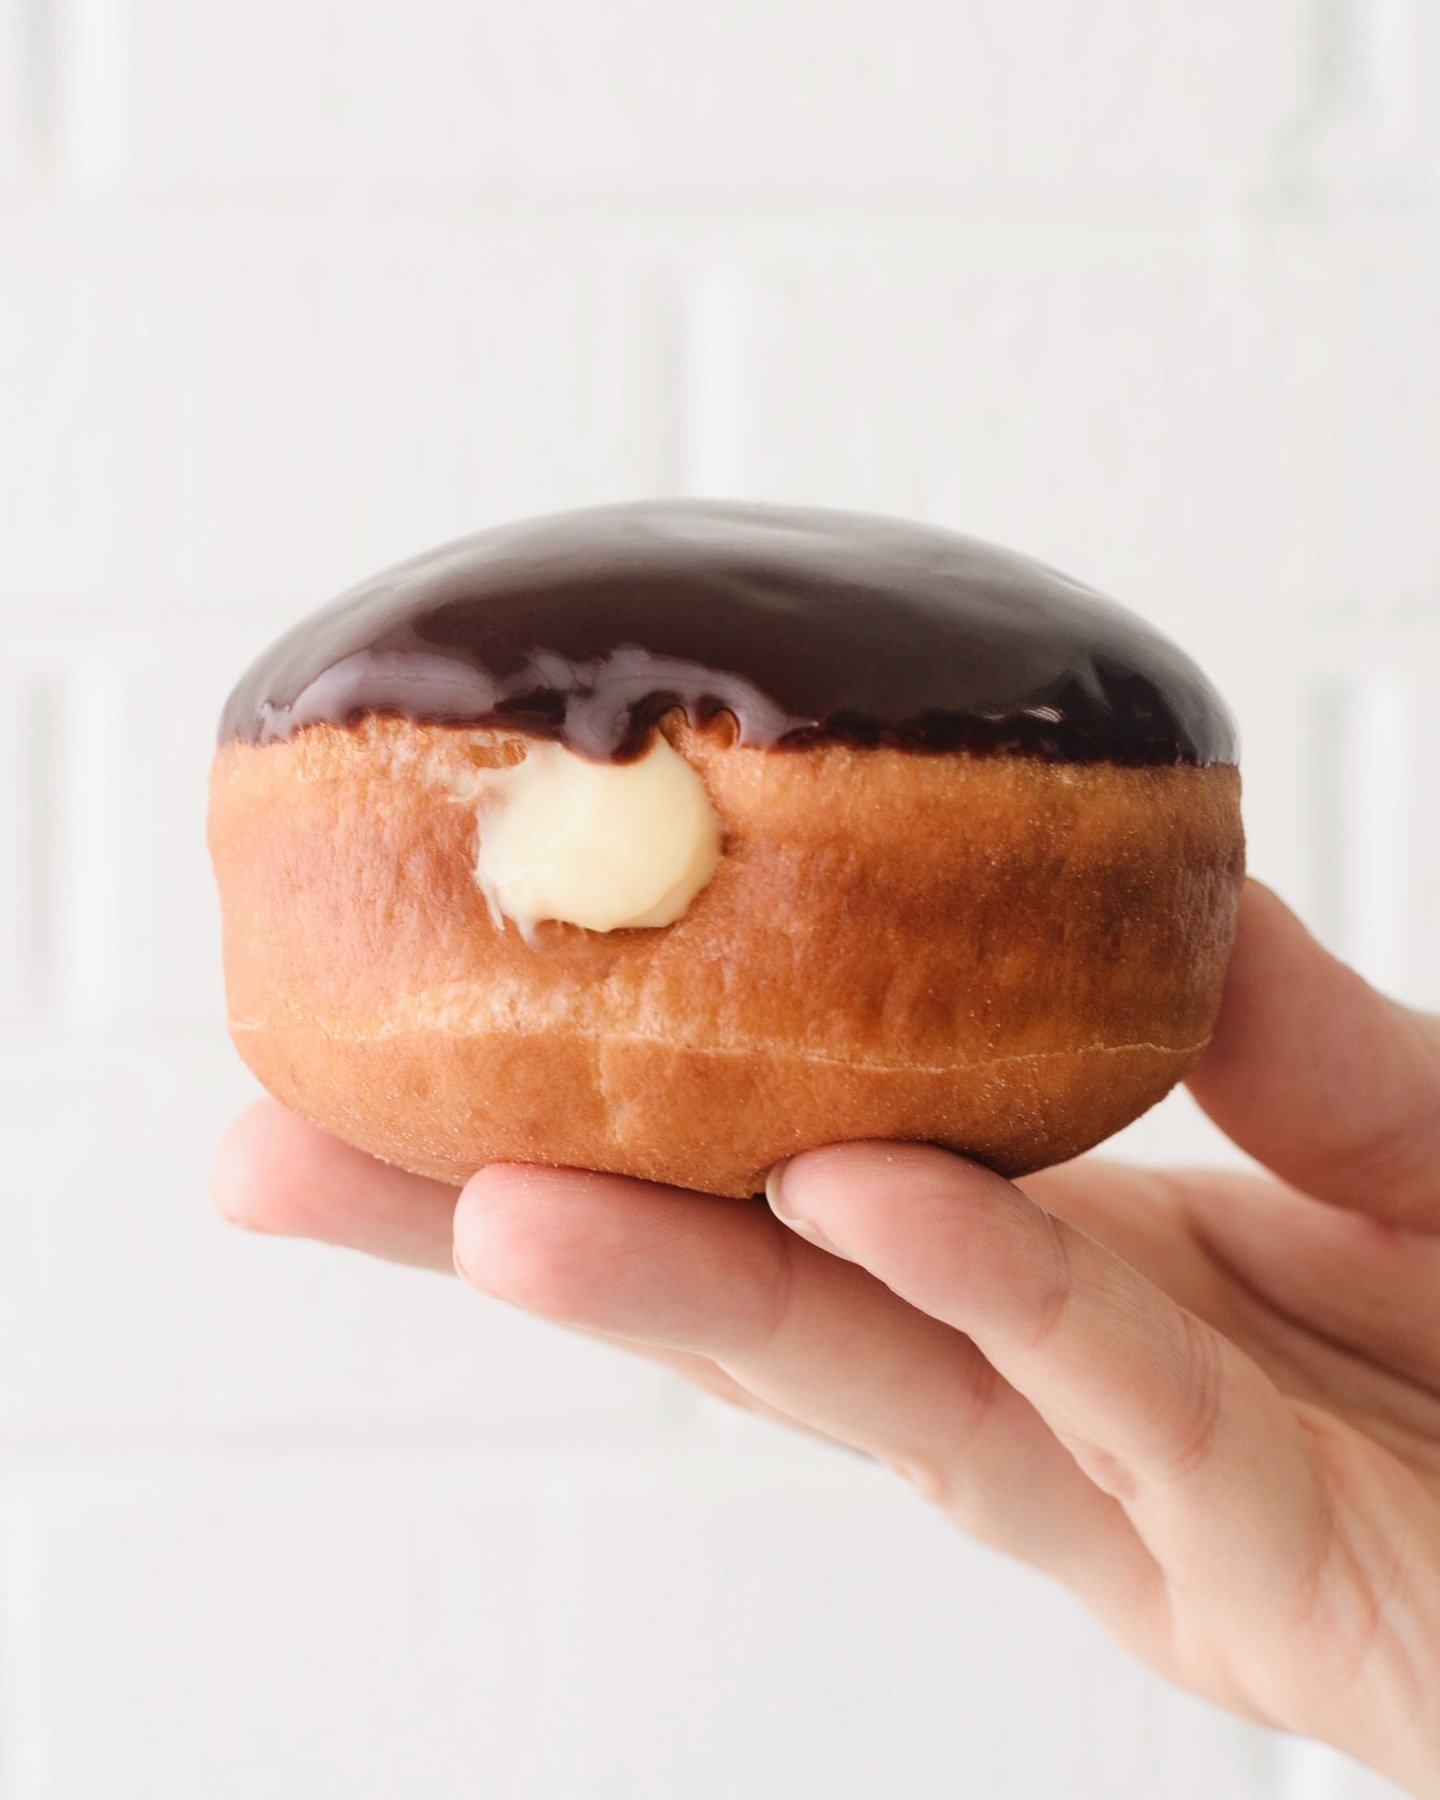 ICYMI&mdash;Boston Cream is back for May 🍫☁️🍩 Fluffy yeast doughnut, vanilla custard filling, and chocolate ganache. Here and @suarezbakeryandbarra till sold out every day this month.